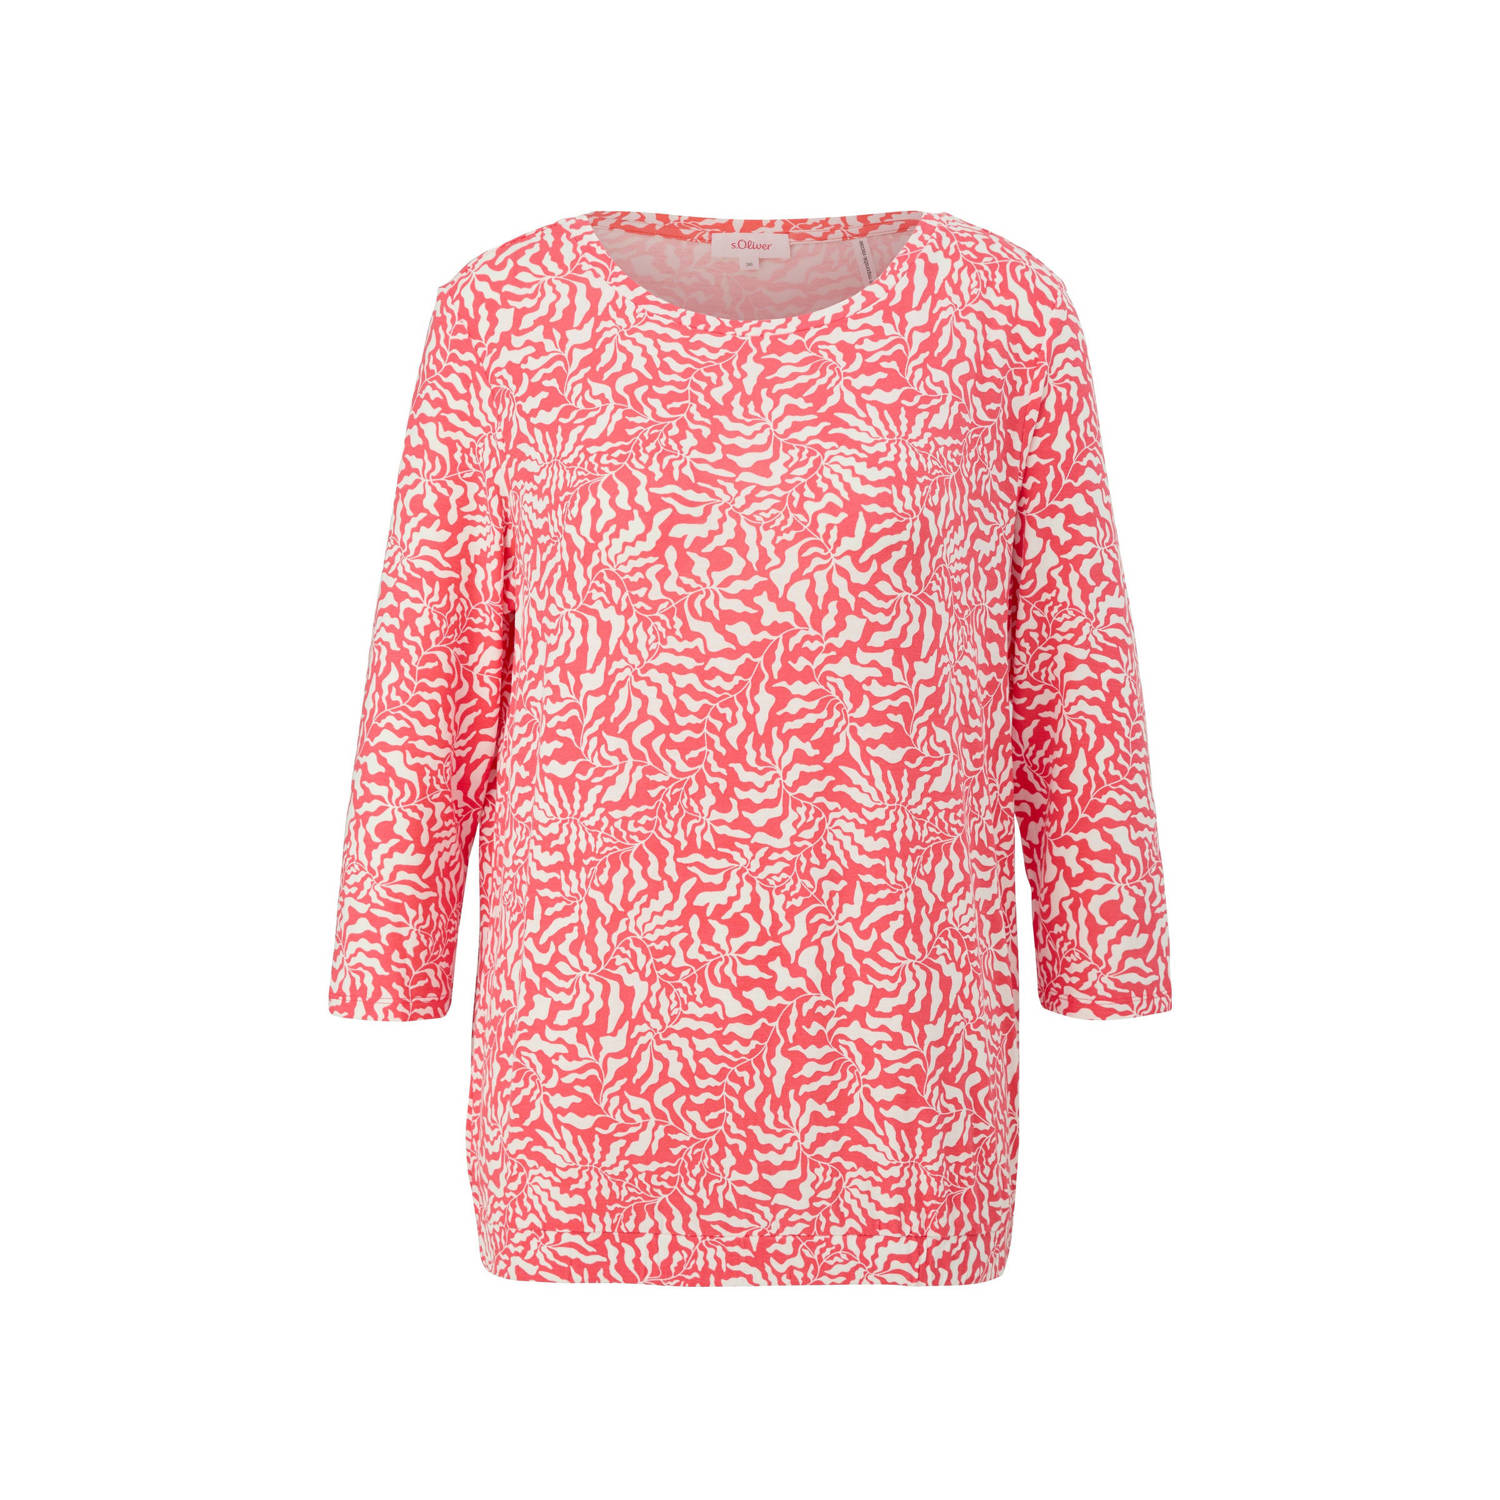 S.Oliver top met all over print rood